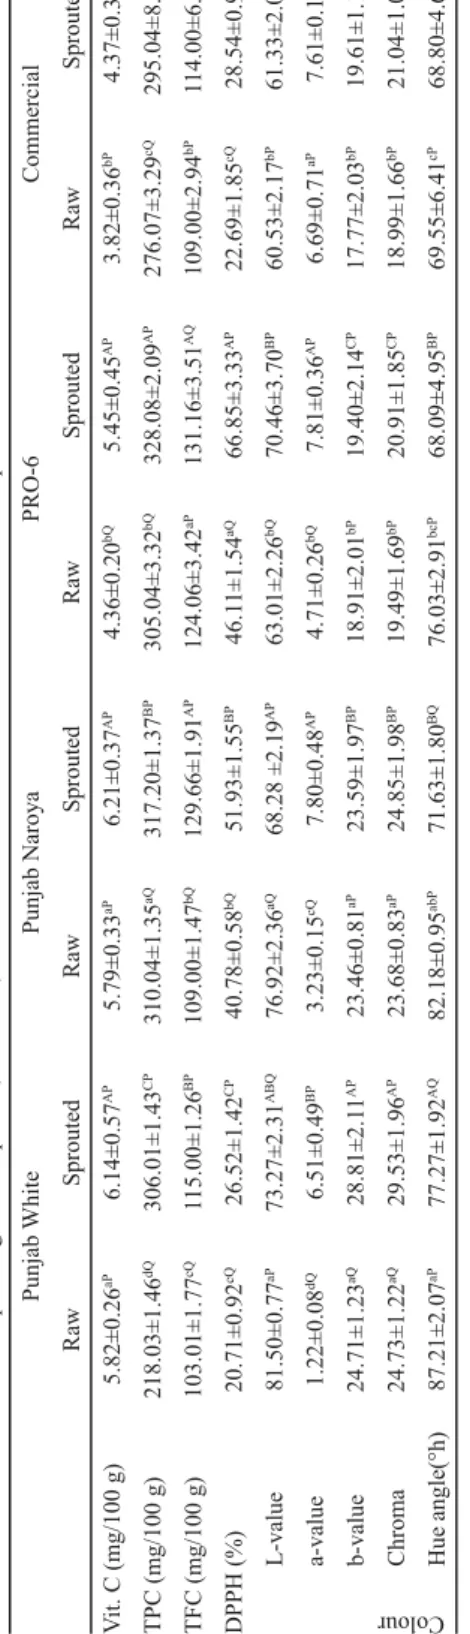 Table 1. Effect of sprouting on total phenol, fl avonoid, and antioxidant contents and colour of freeze dried powders from four Indian onion cultivars Punjab WhitePunjab NaroyaPRO-6Commercial RawSproutedRawSproutedRawSproutedRawSprouted Vit